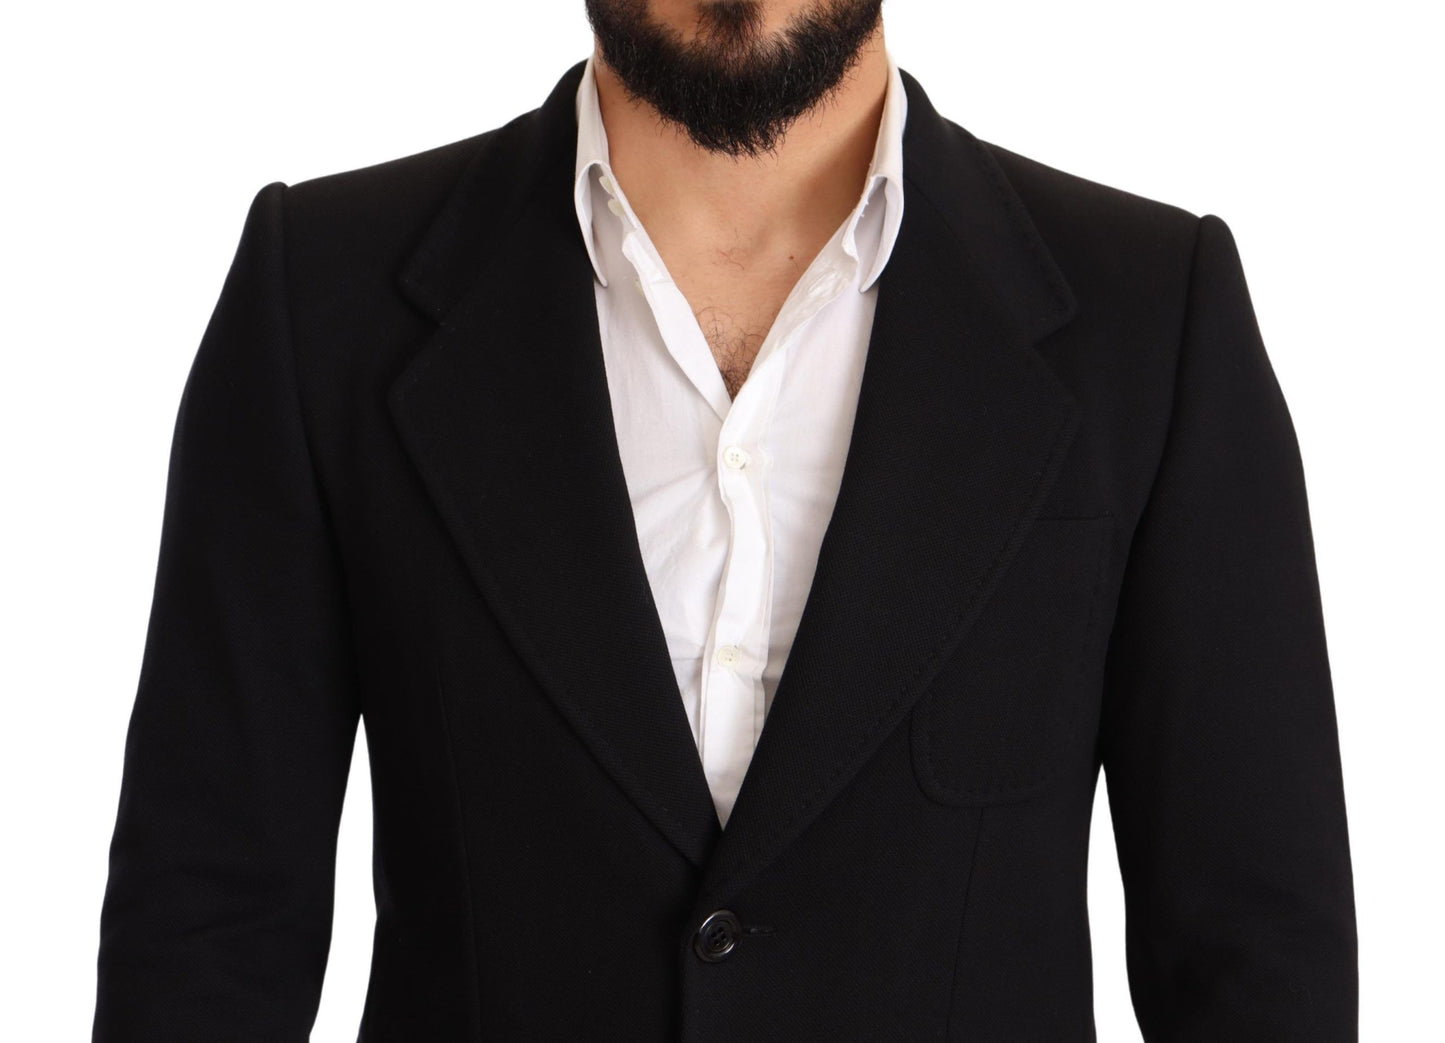 Black Cotton Slim Fit Coat Jacket  Blazer - Designed by Dolce & Gabbana Available to Buy at a Discounted Price on Moon Behind The Hill Online Designer Discount Store